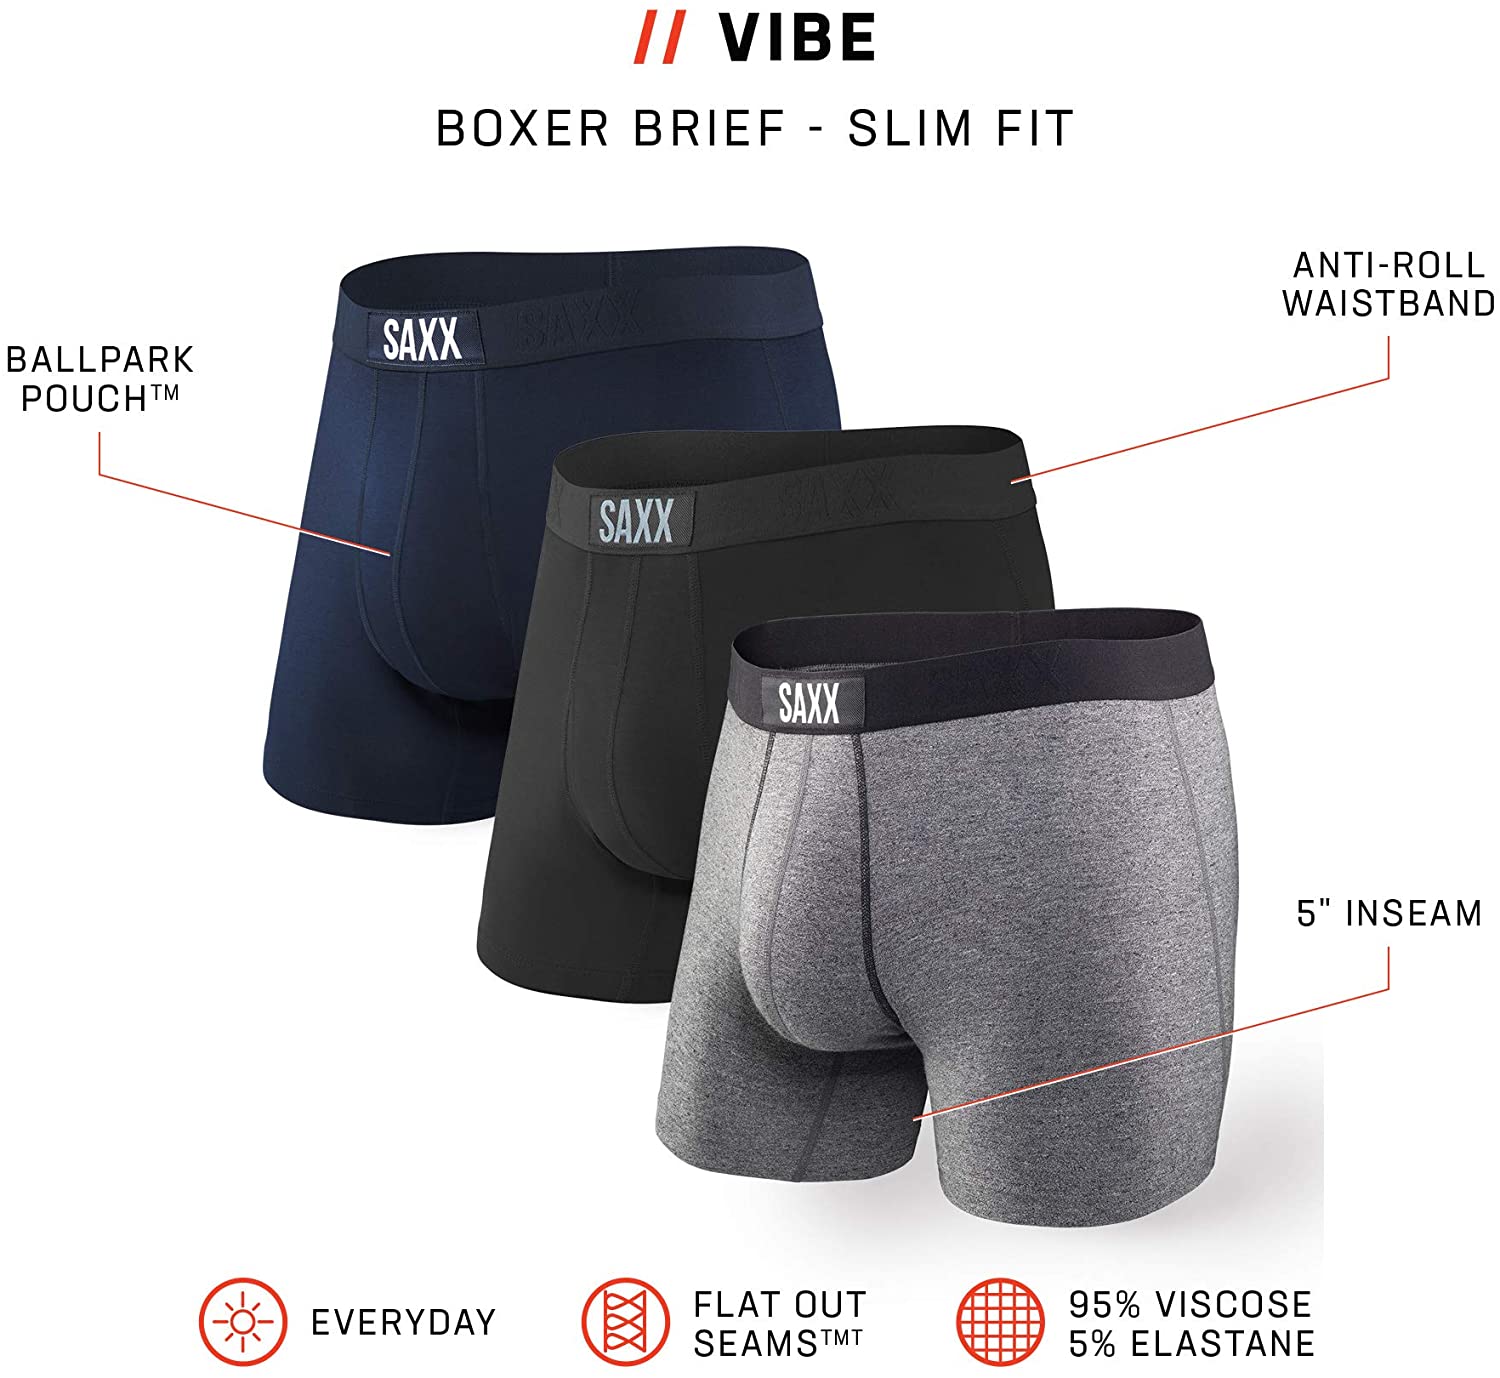 Vibe Boxer Briefs with Built-in Ballpark Pouch Support Saxx Men/'s Underwear Pack of 3